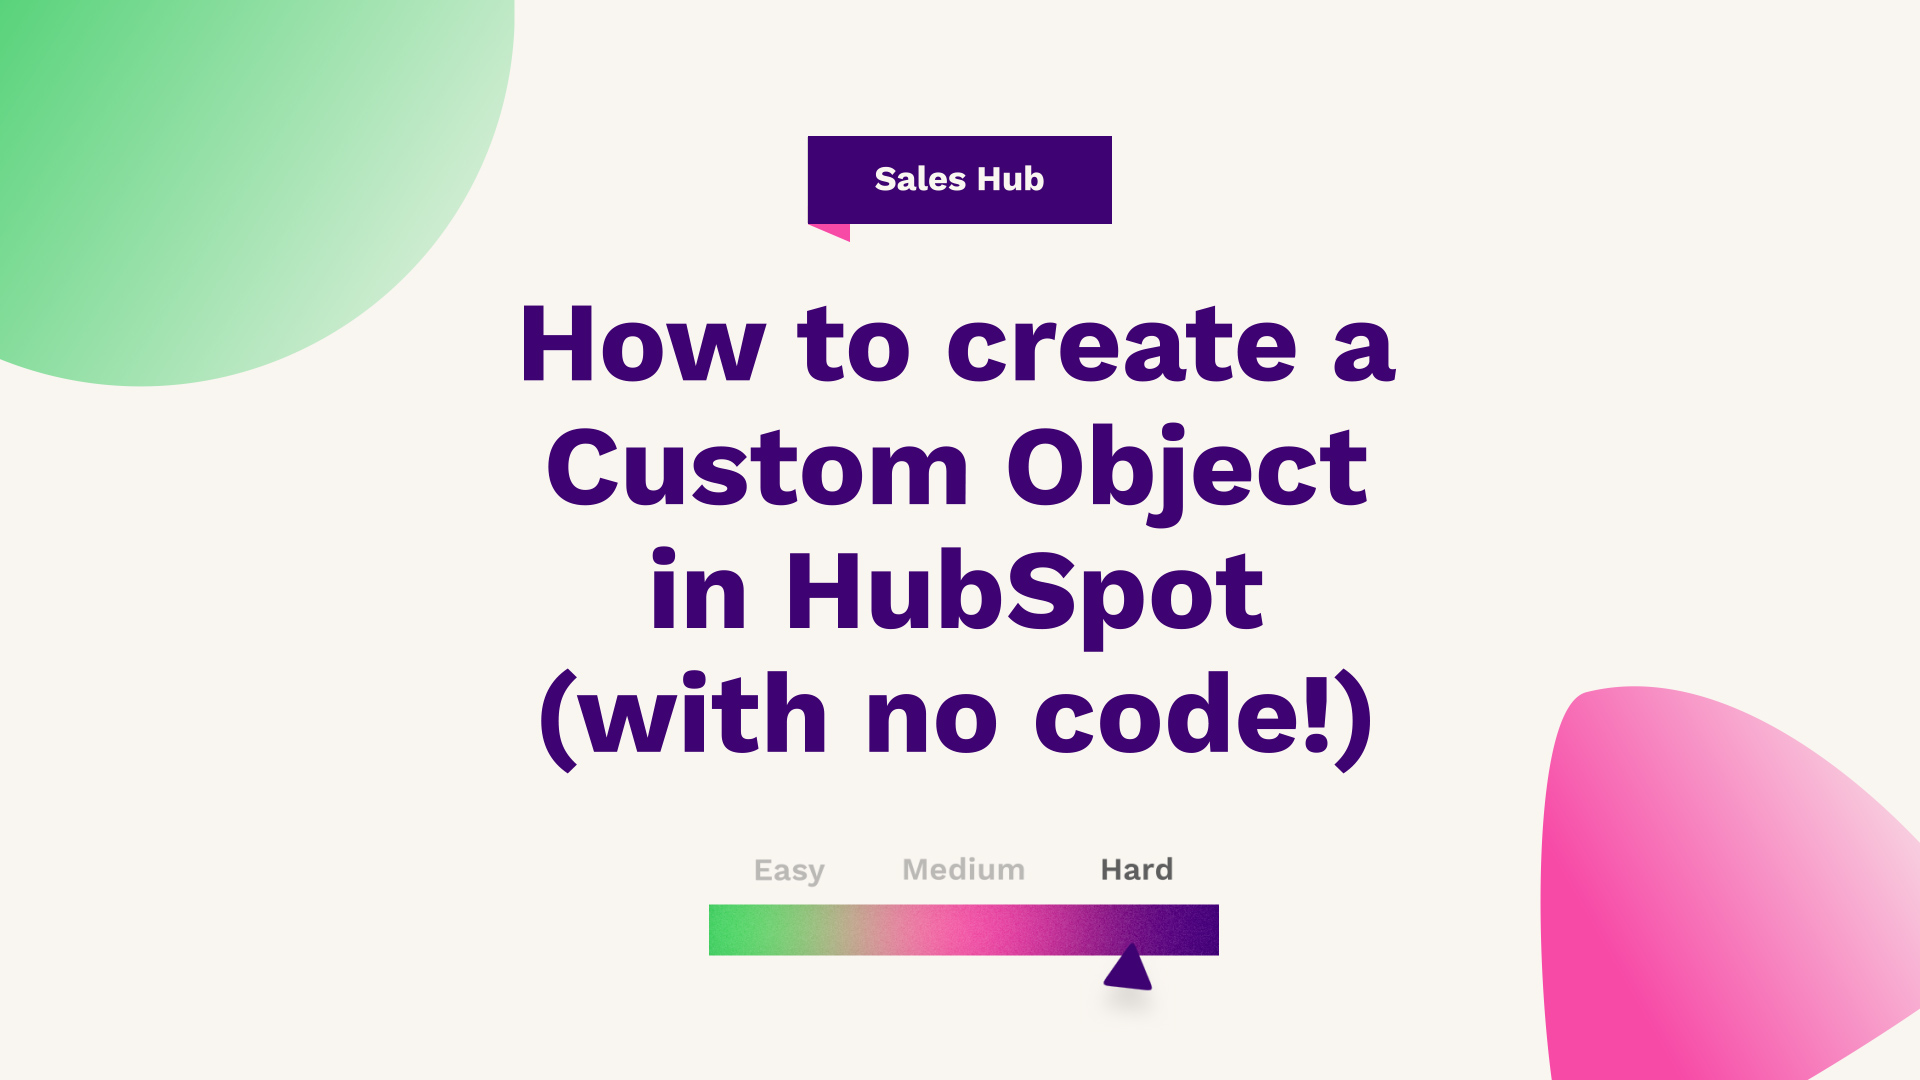 How to create a Custom Object in HubSpot (without code!)